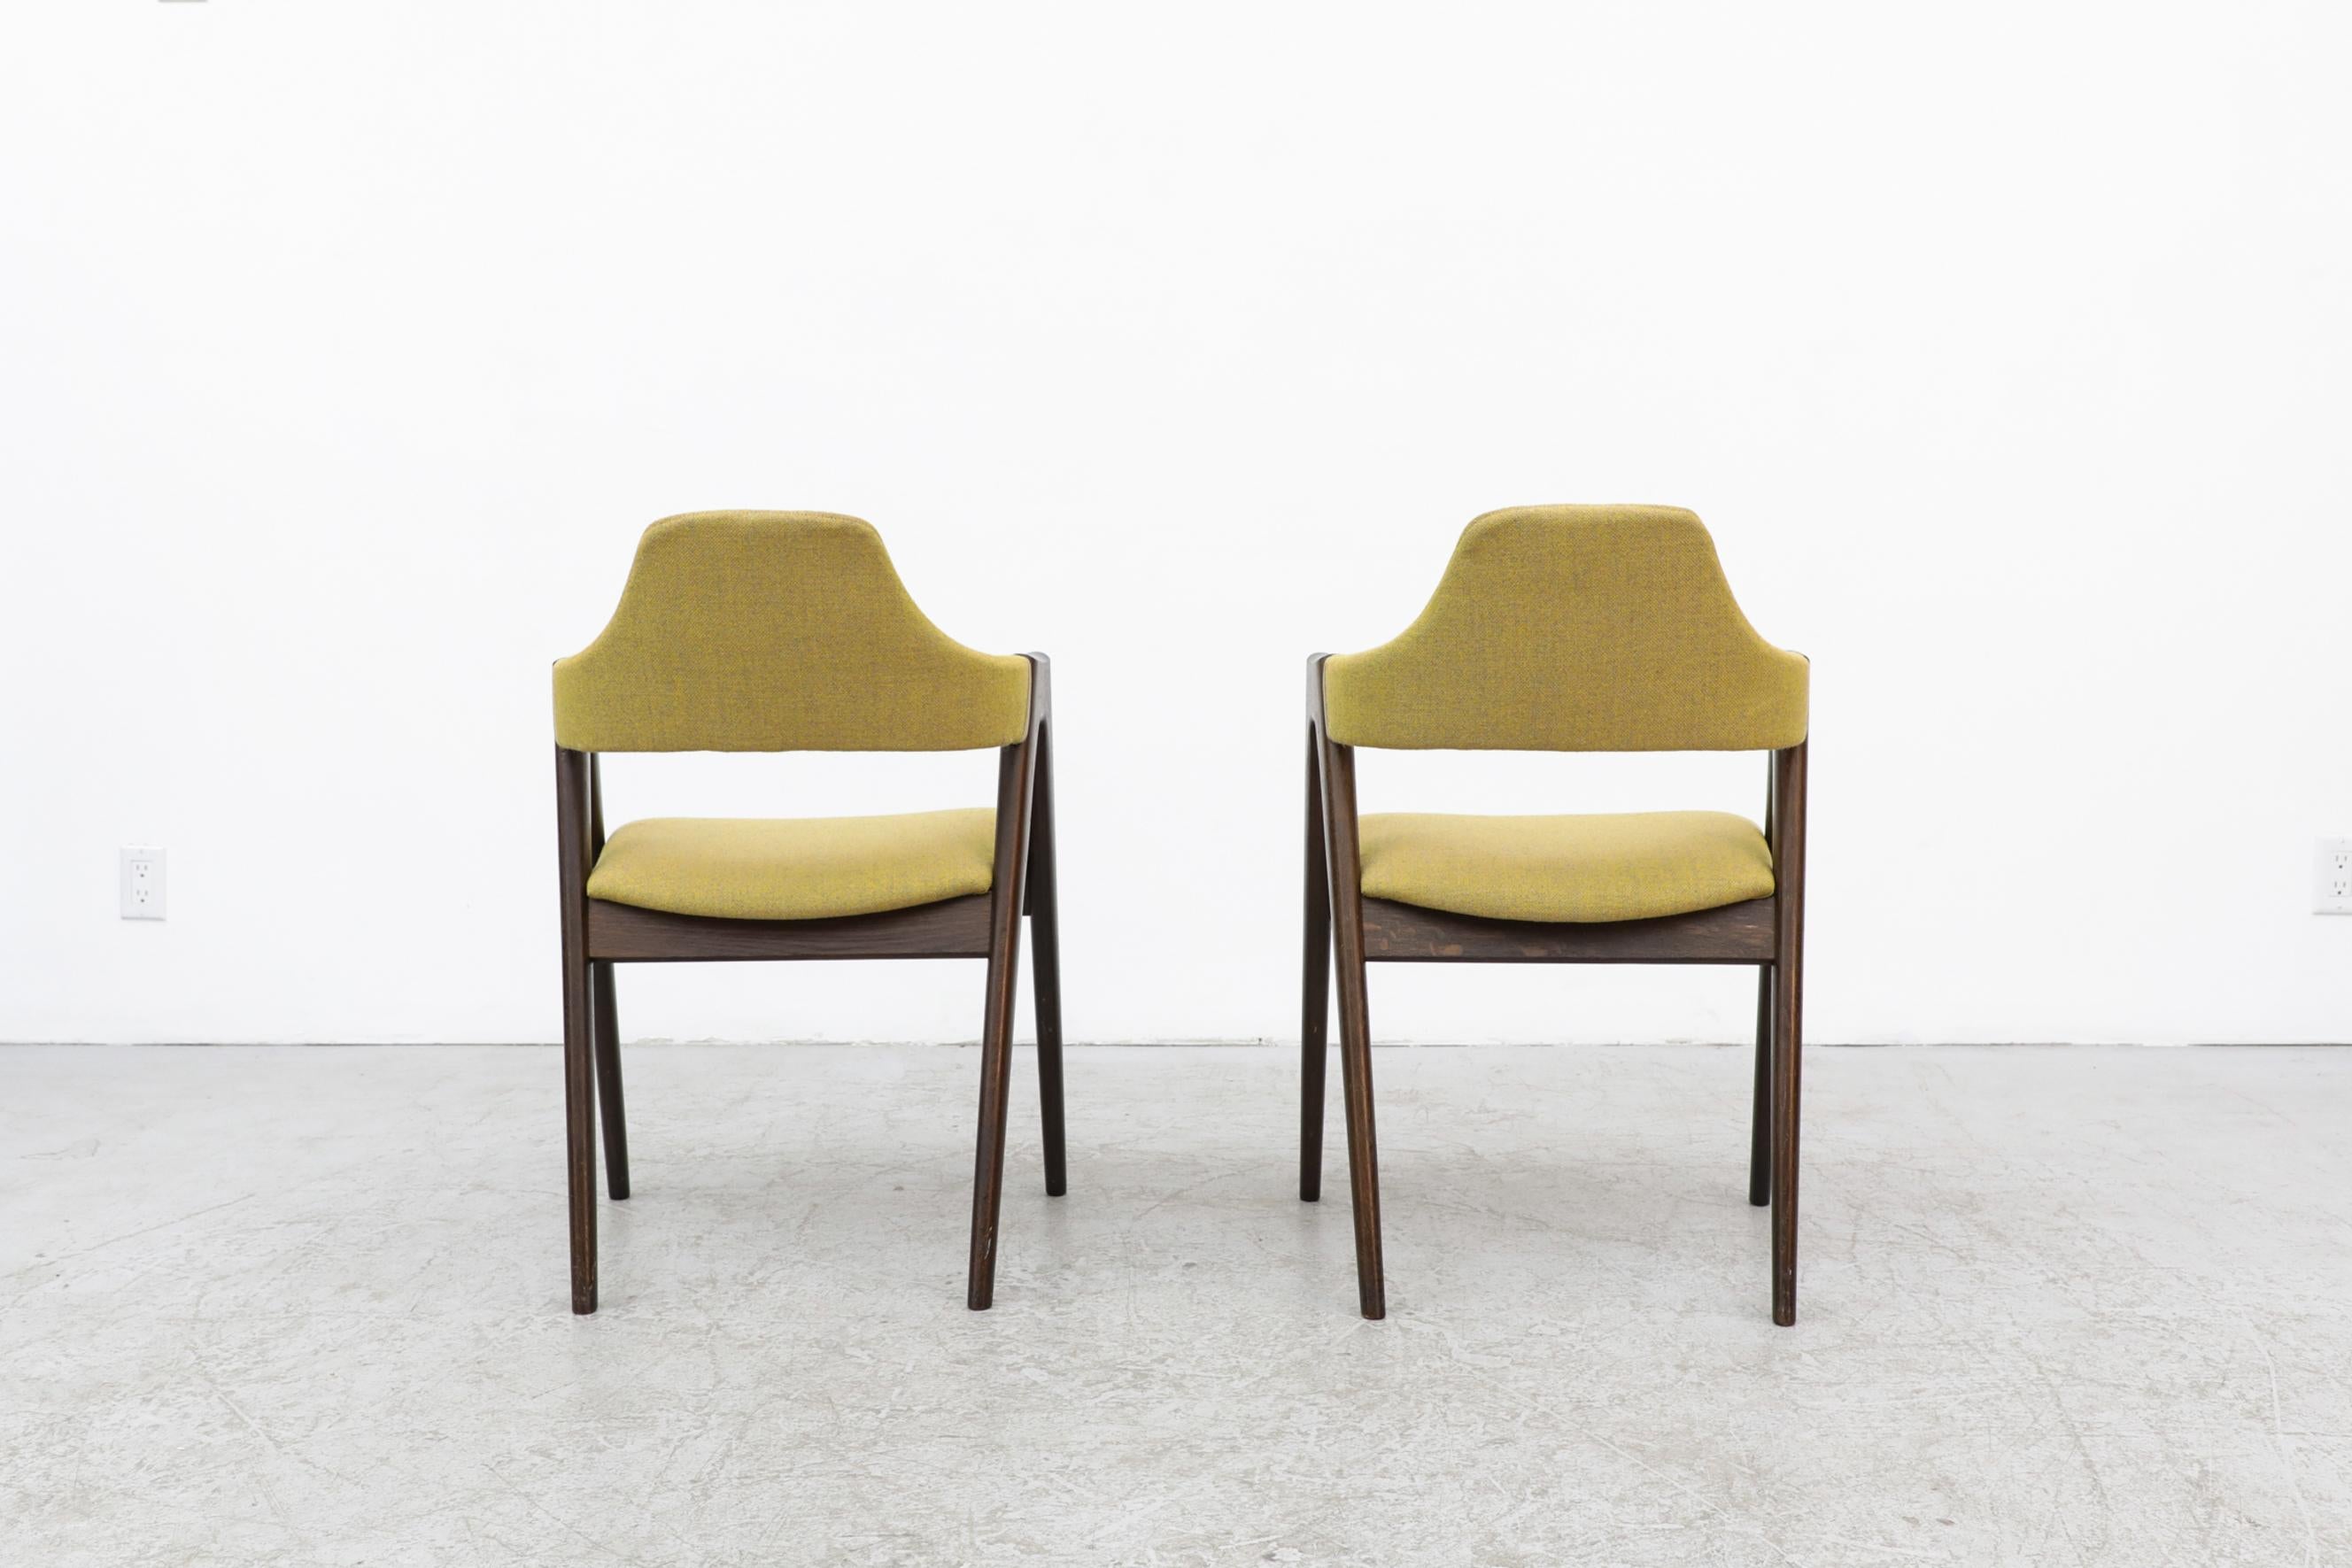 Mid-20th Century Pair of Kai Kristiansen Dark Stained Wood Framed Compass Chairs in Kiwi Fabric For Sale